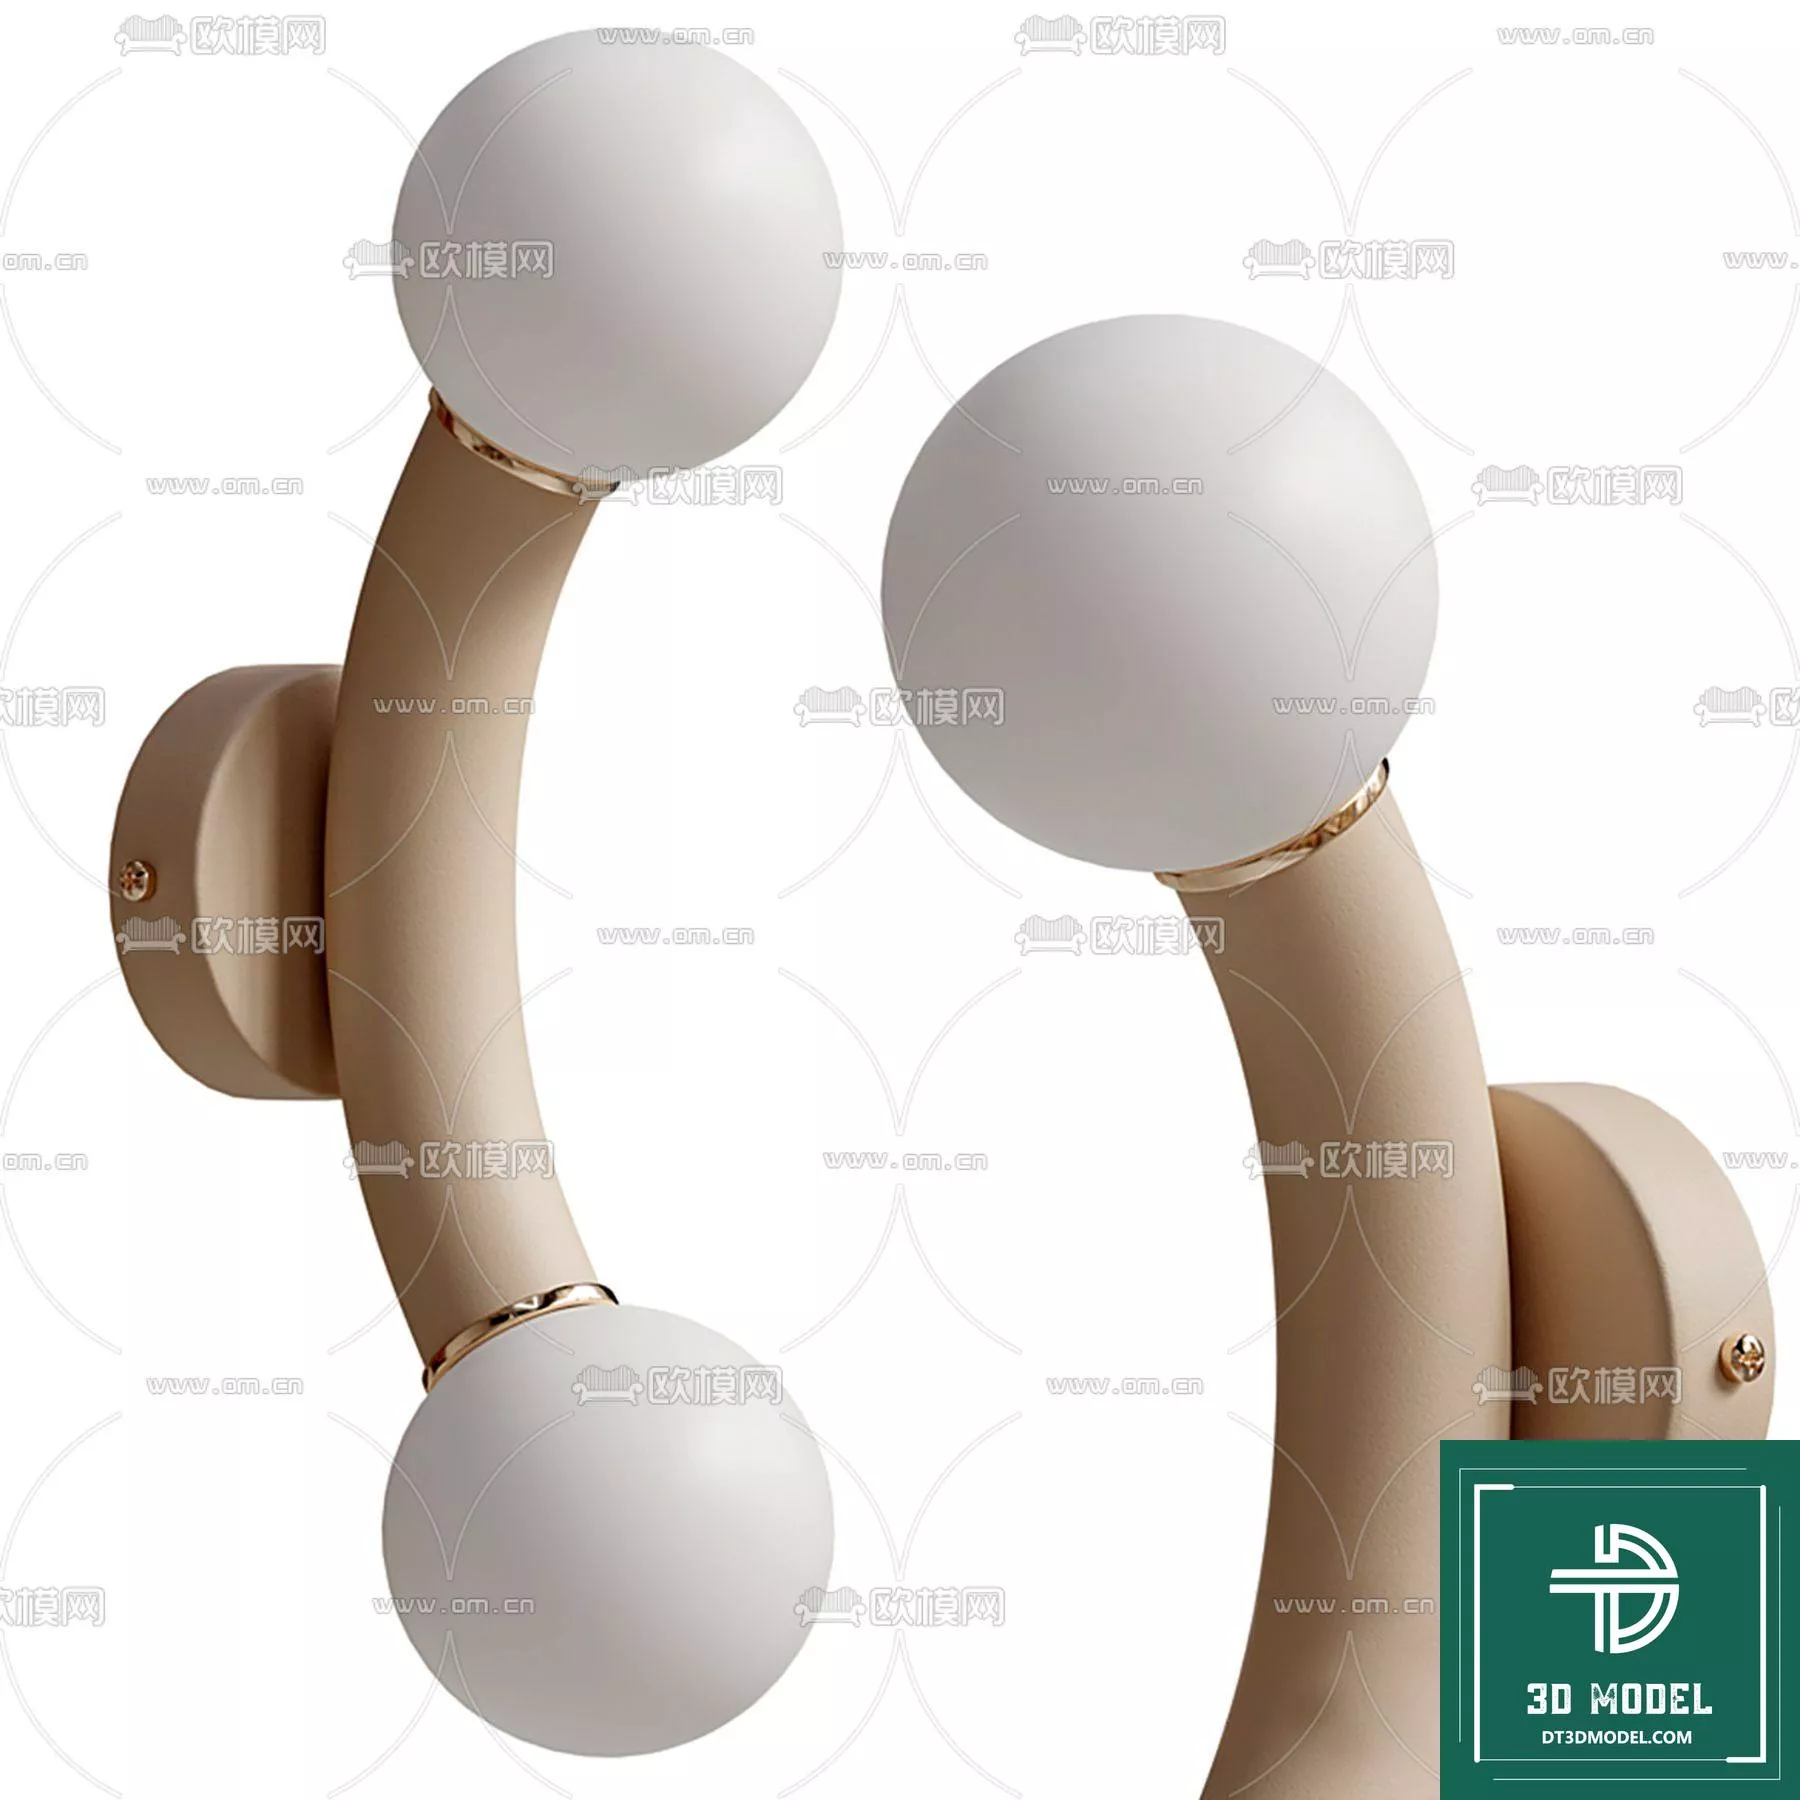 MODERN WALL LAMP - SKETCHUP 3D MODEL - VRAY OR ENSCAPE - ID16093